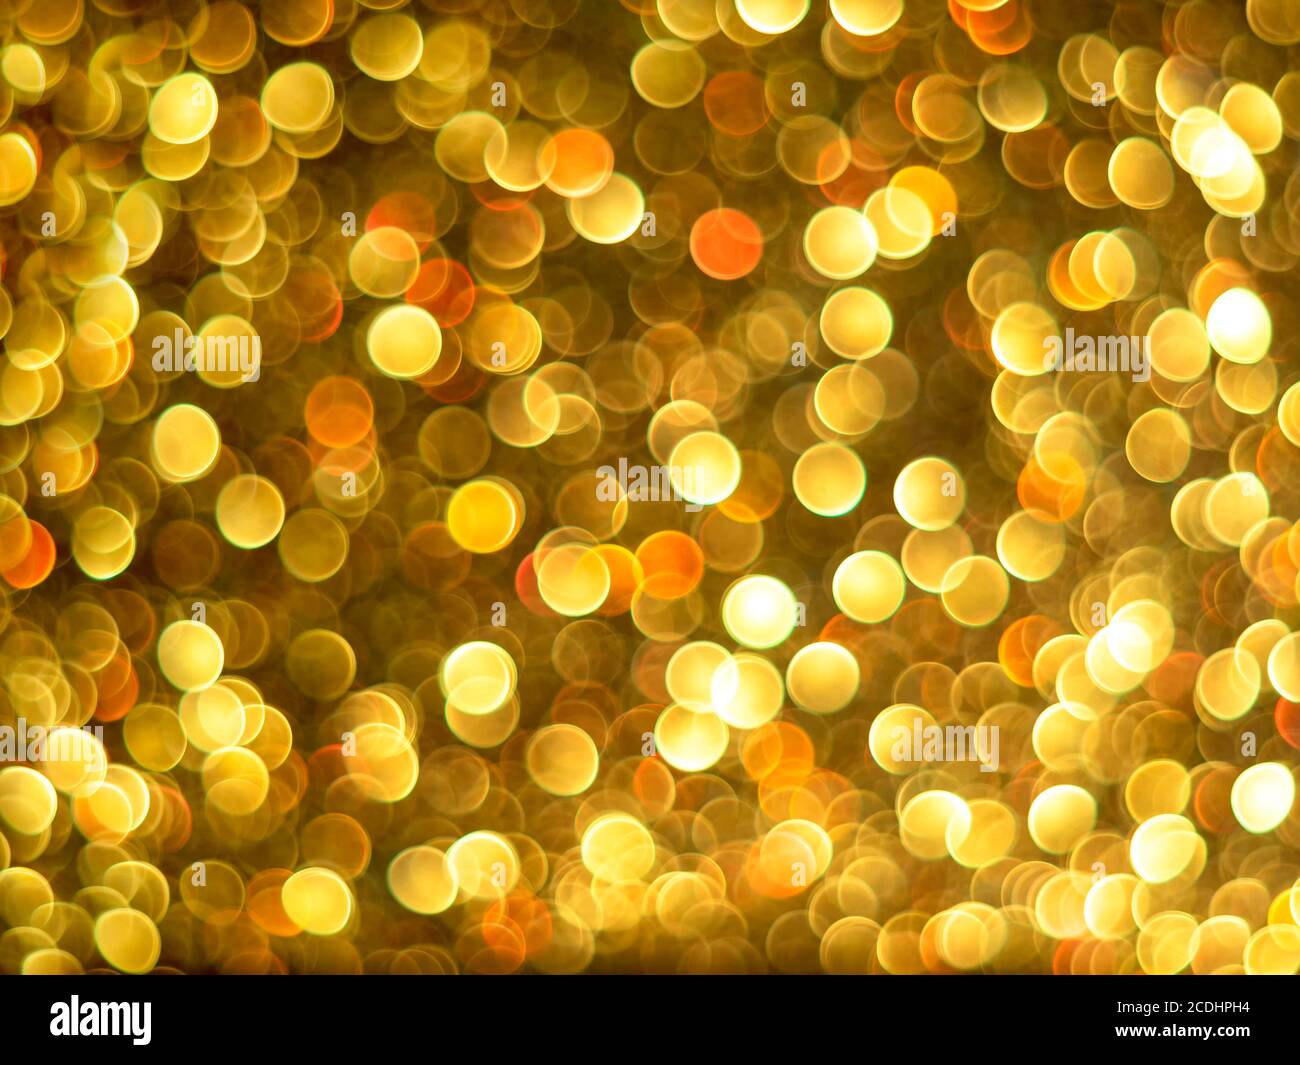 Gold bokeh holiday textured glitter background. Blurred abstract holiday background. Stock Photo